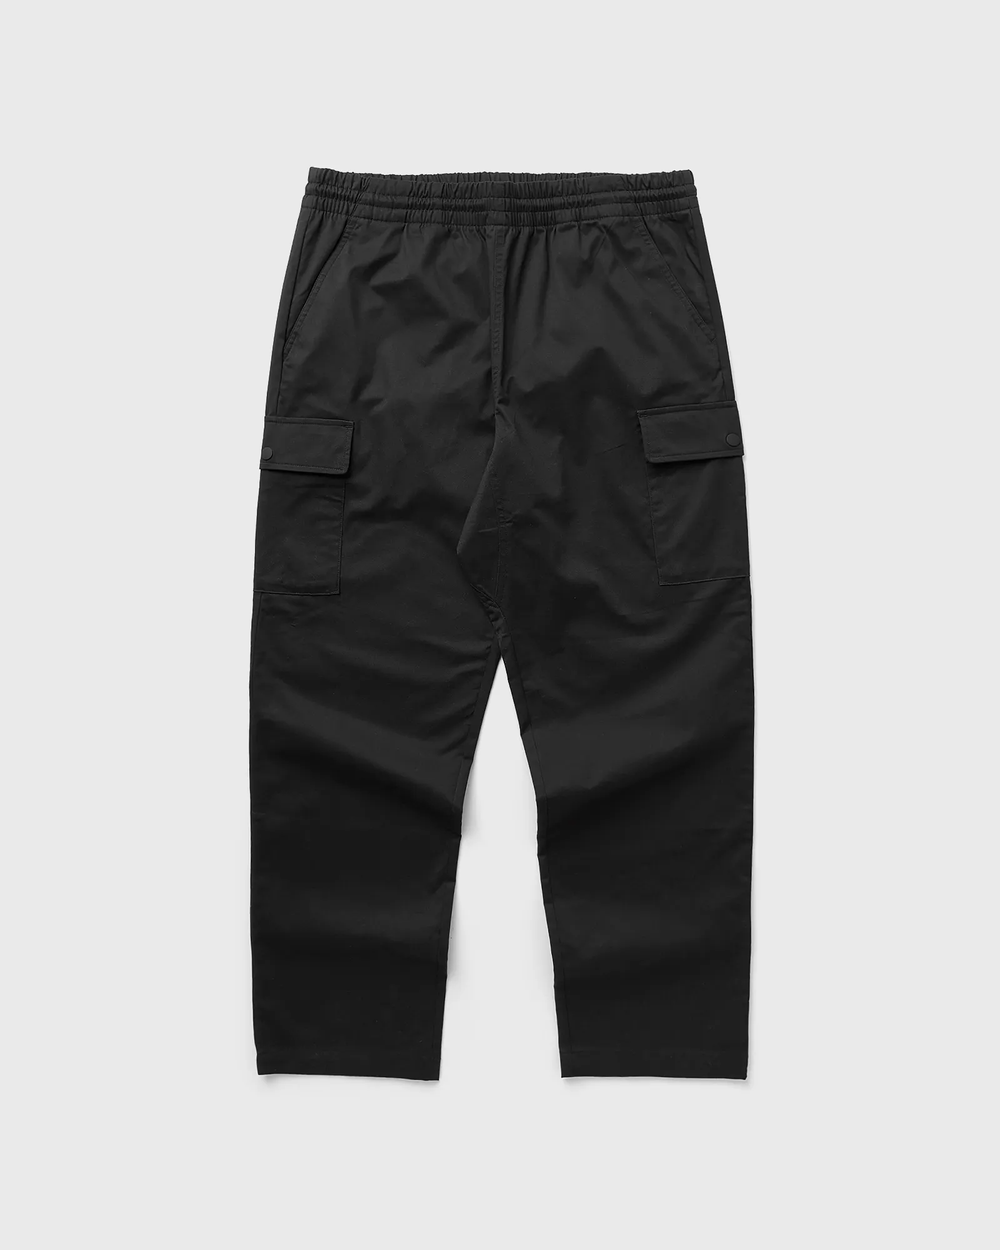 30% OFF the Nike Therma Fit Repel Challenger Pants — Sneaker Shouts